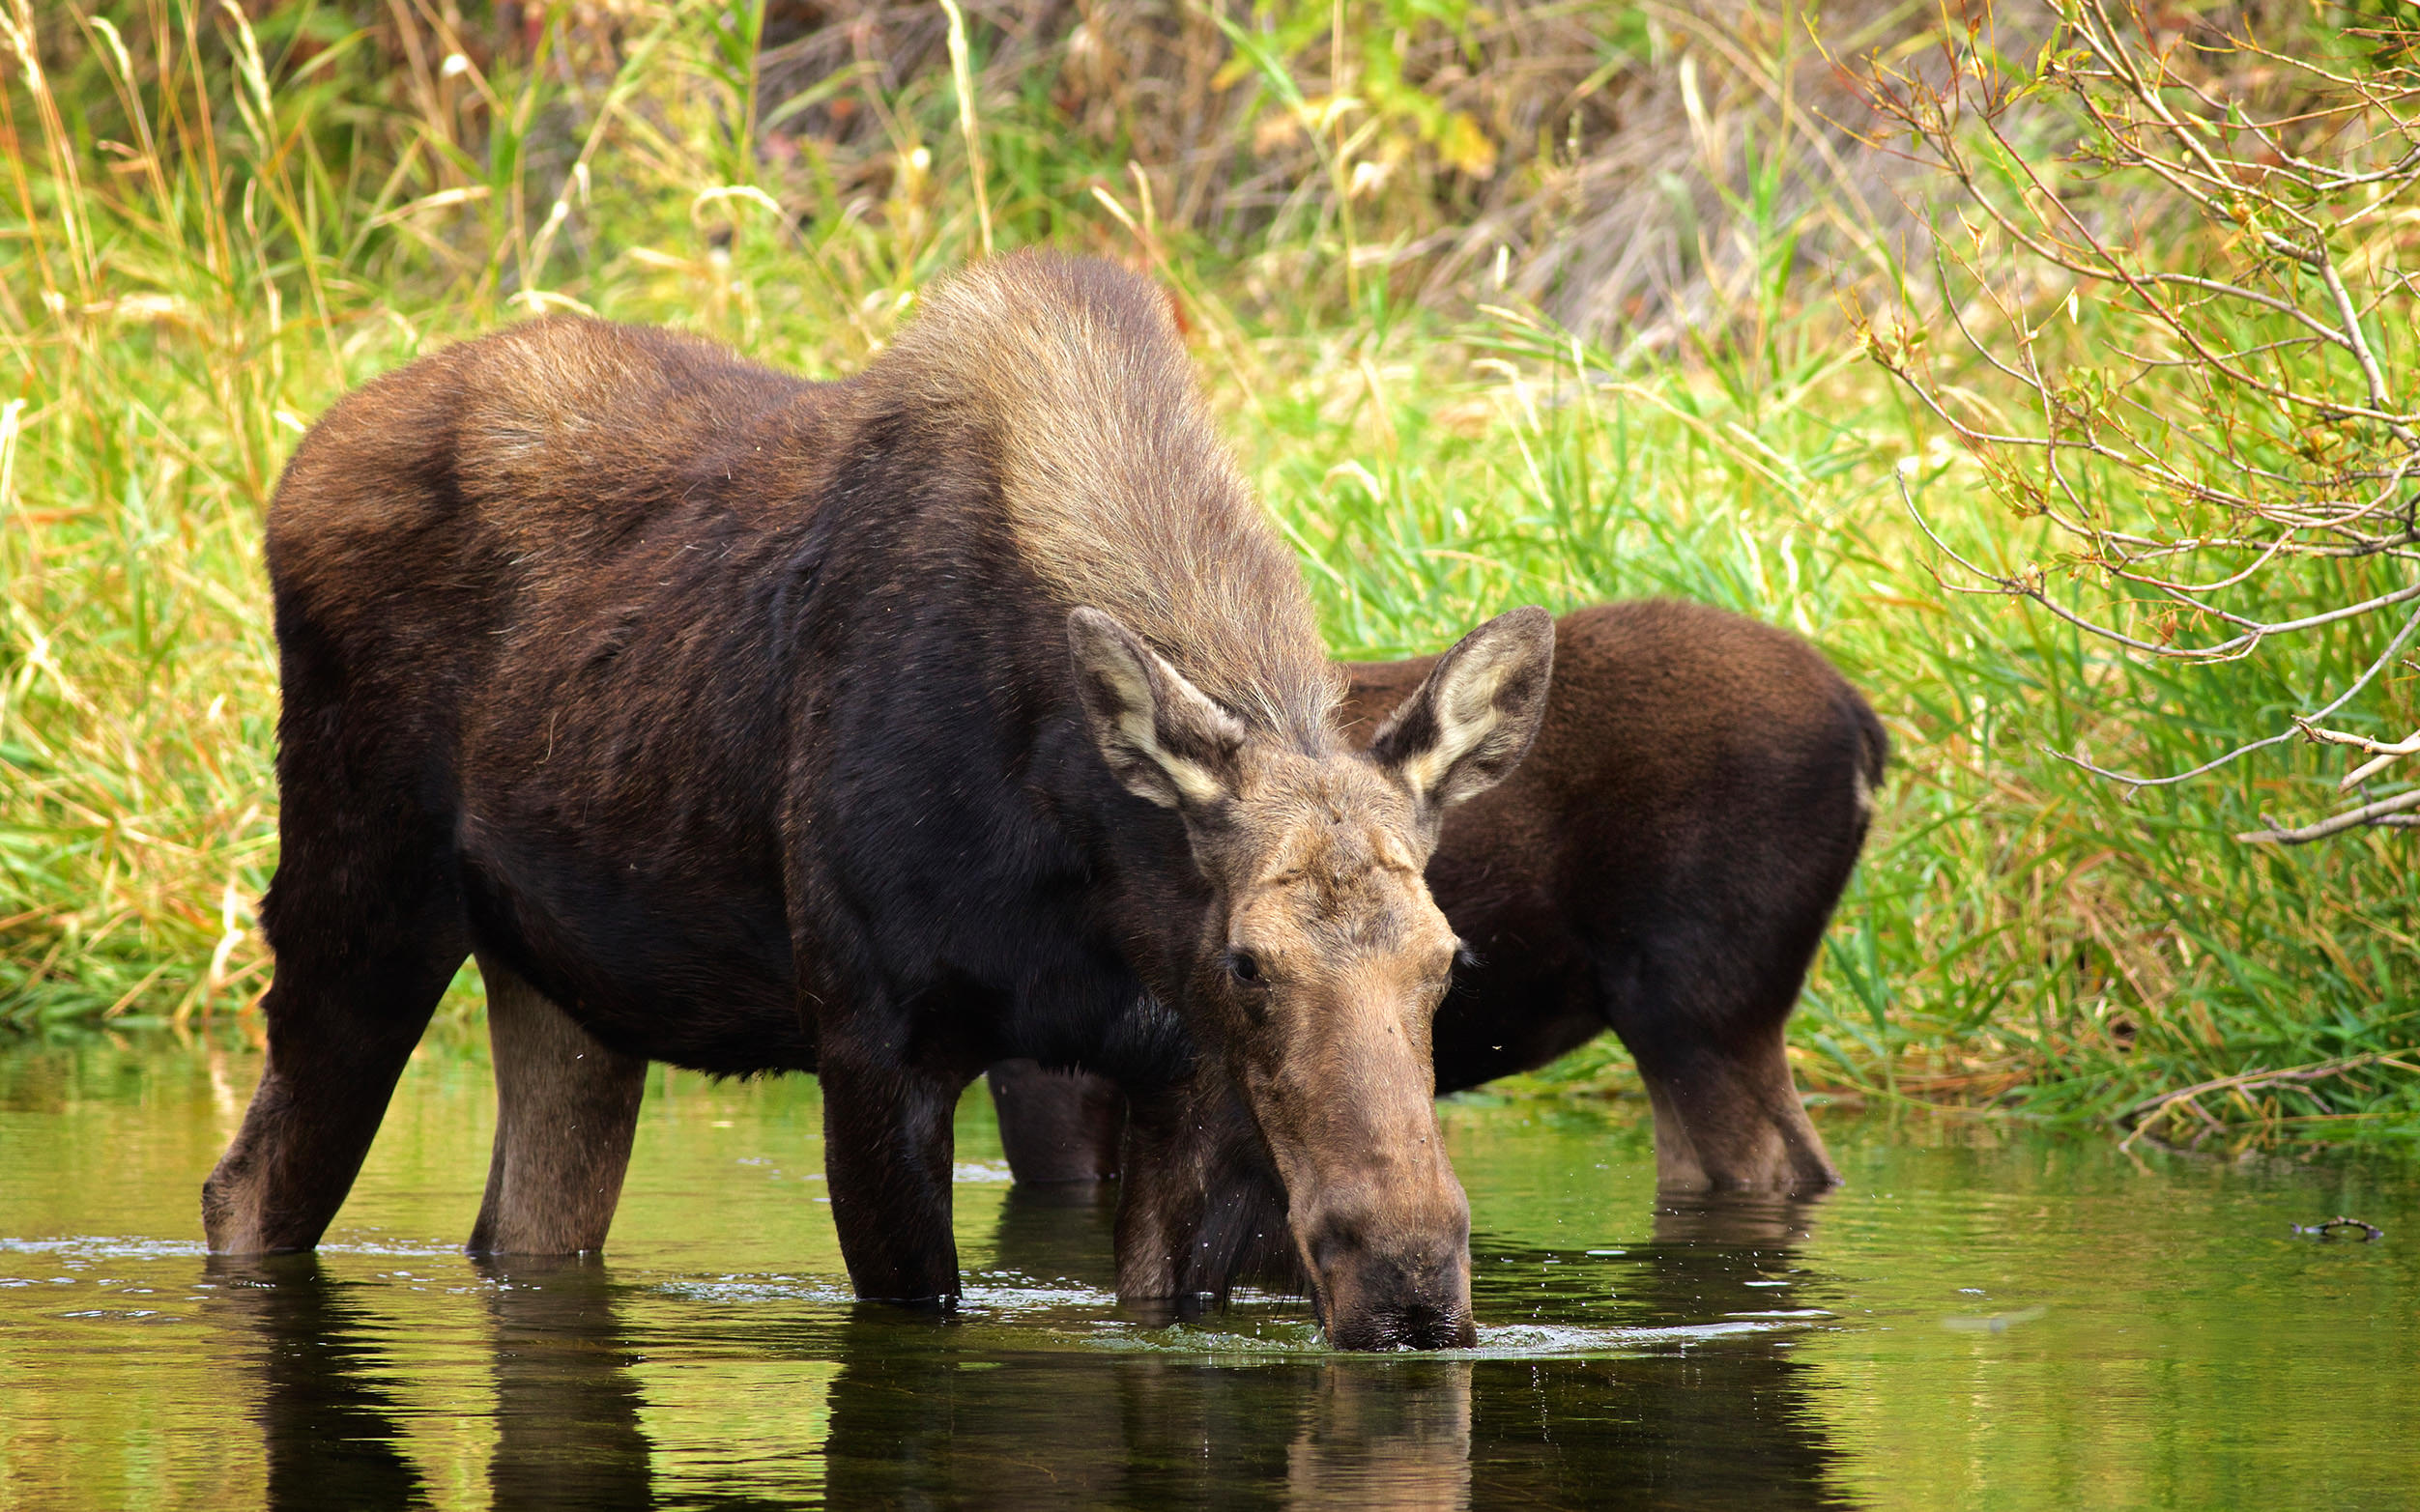 A mother moose and her calf drink water along a stream bank.